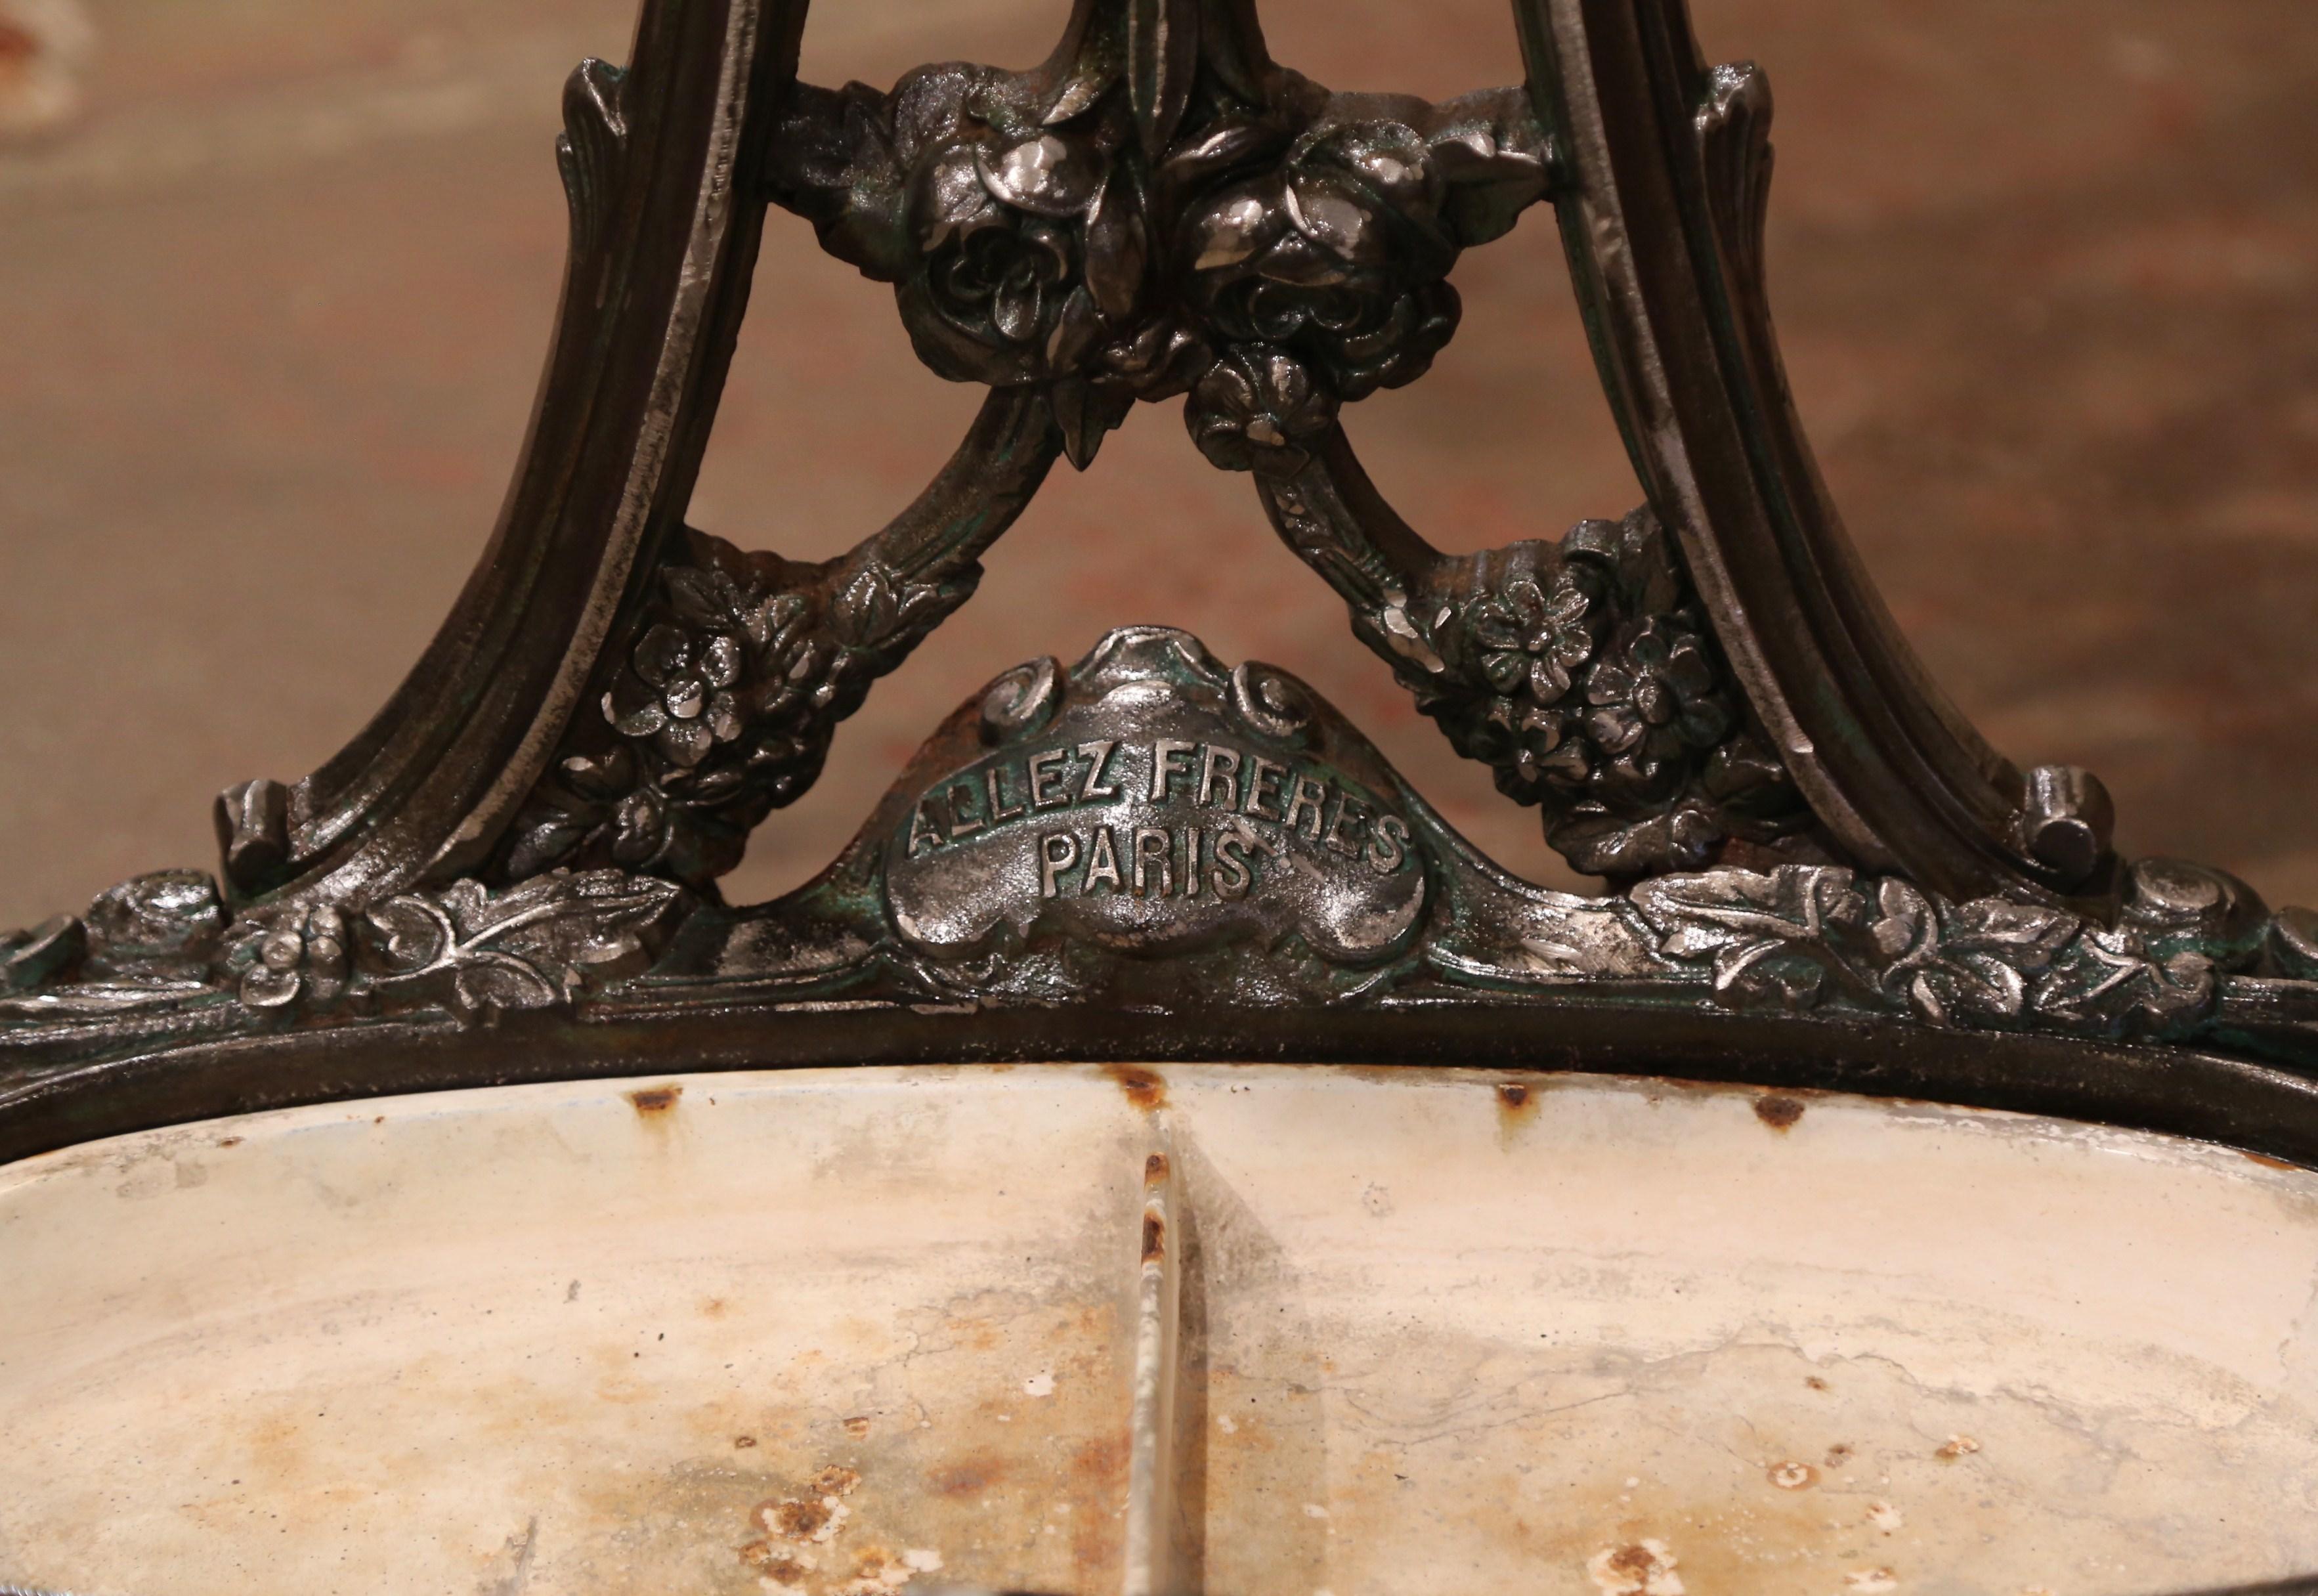 19th Century French Polished Cast Iron Hall Stand Signed Allez Freres, Paris 3